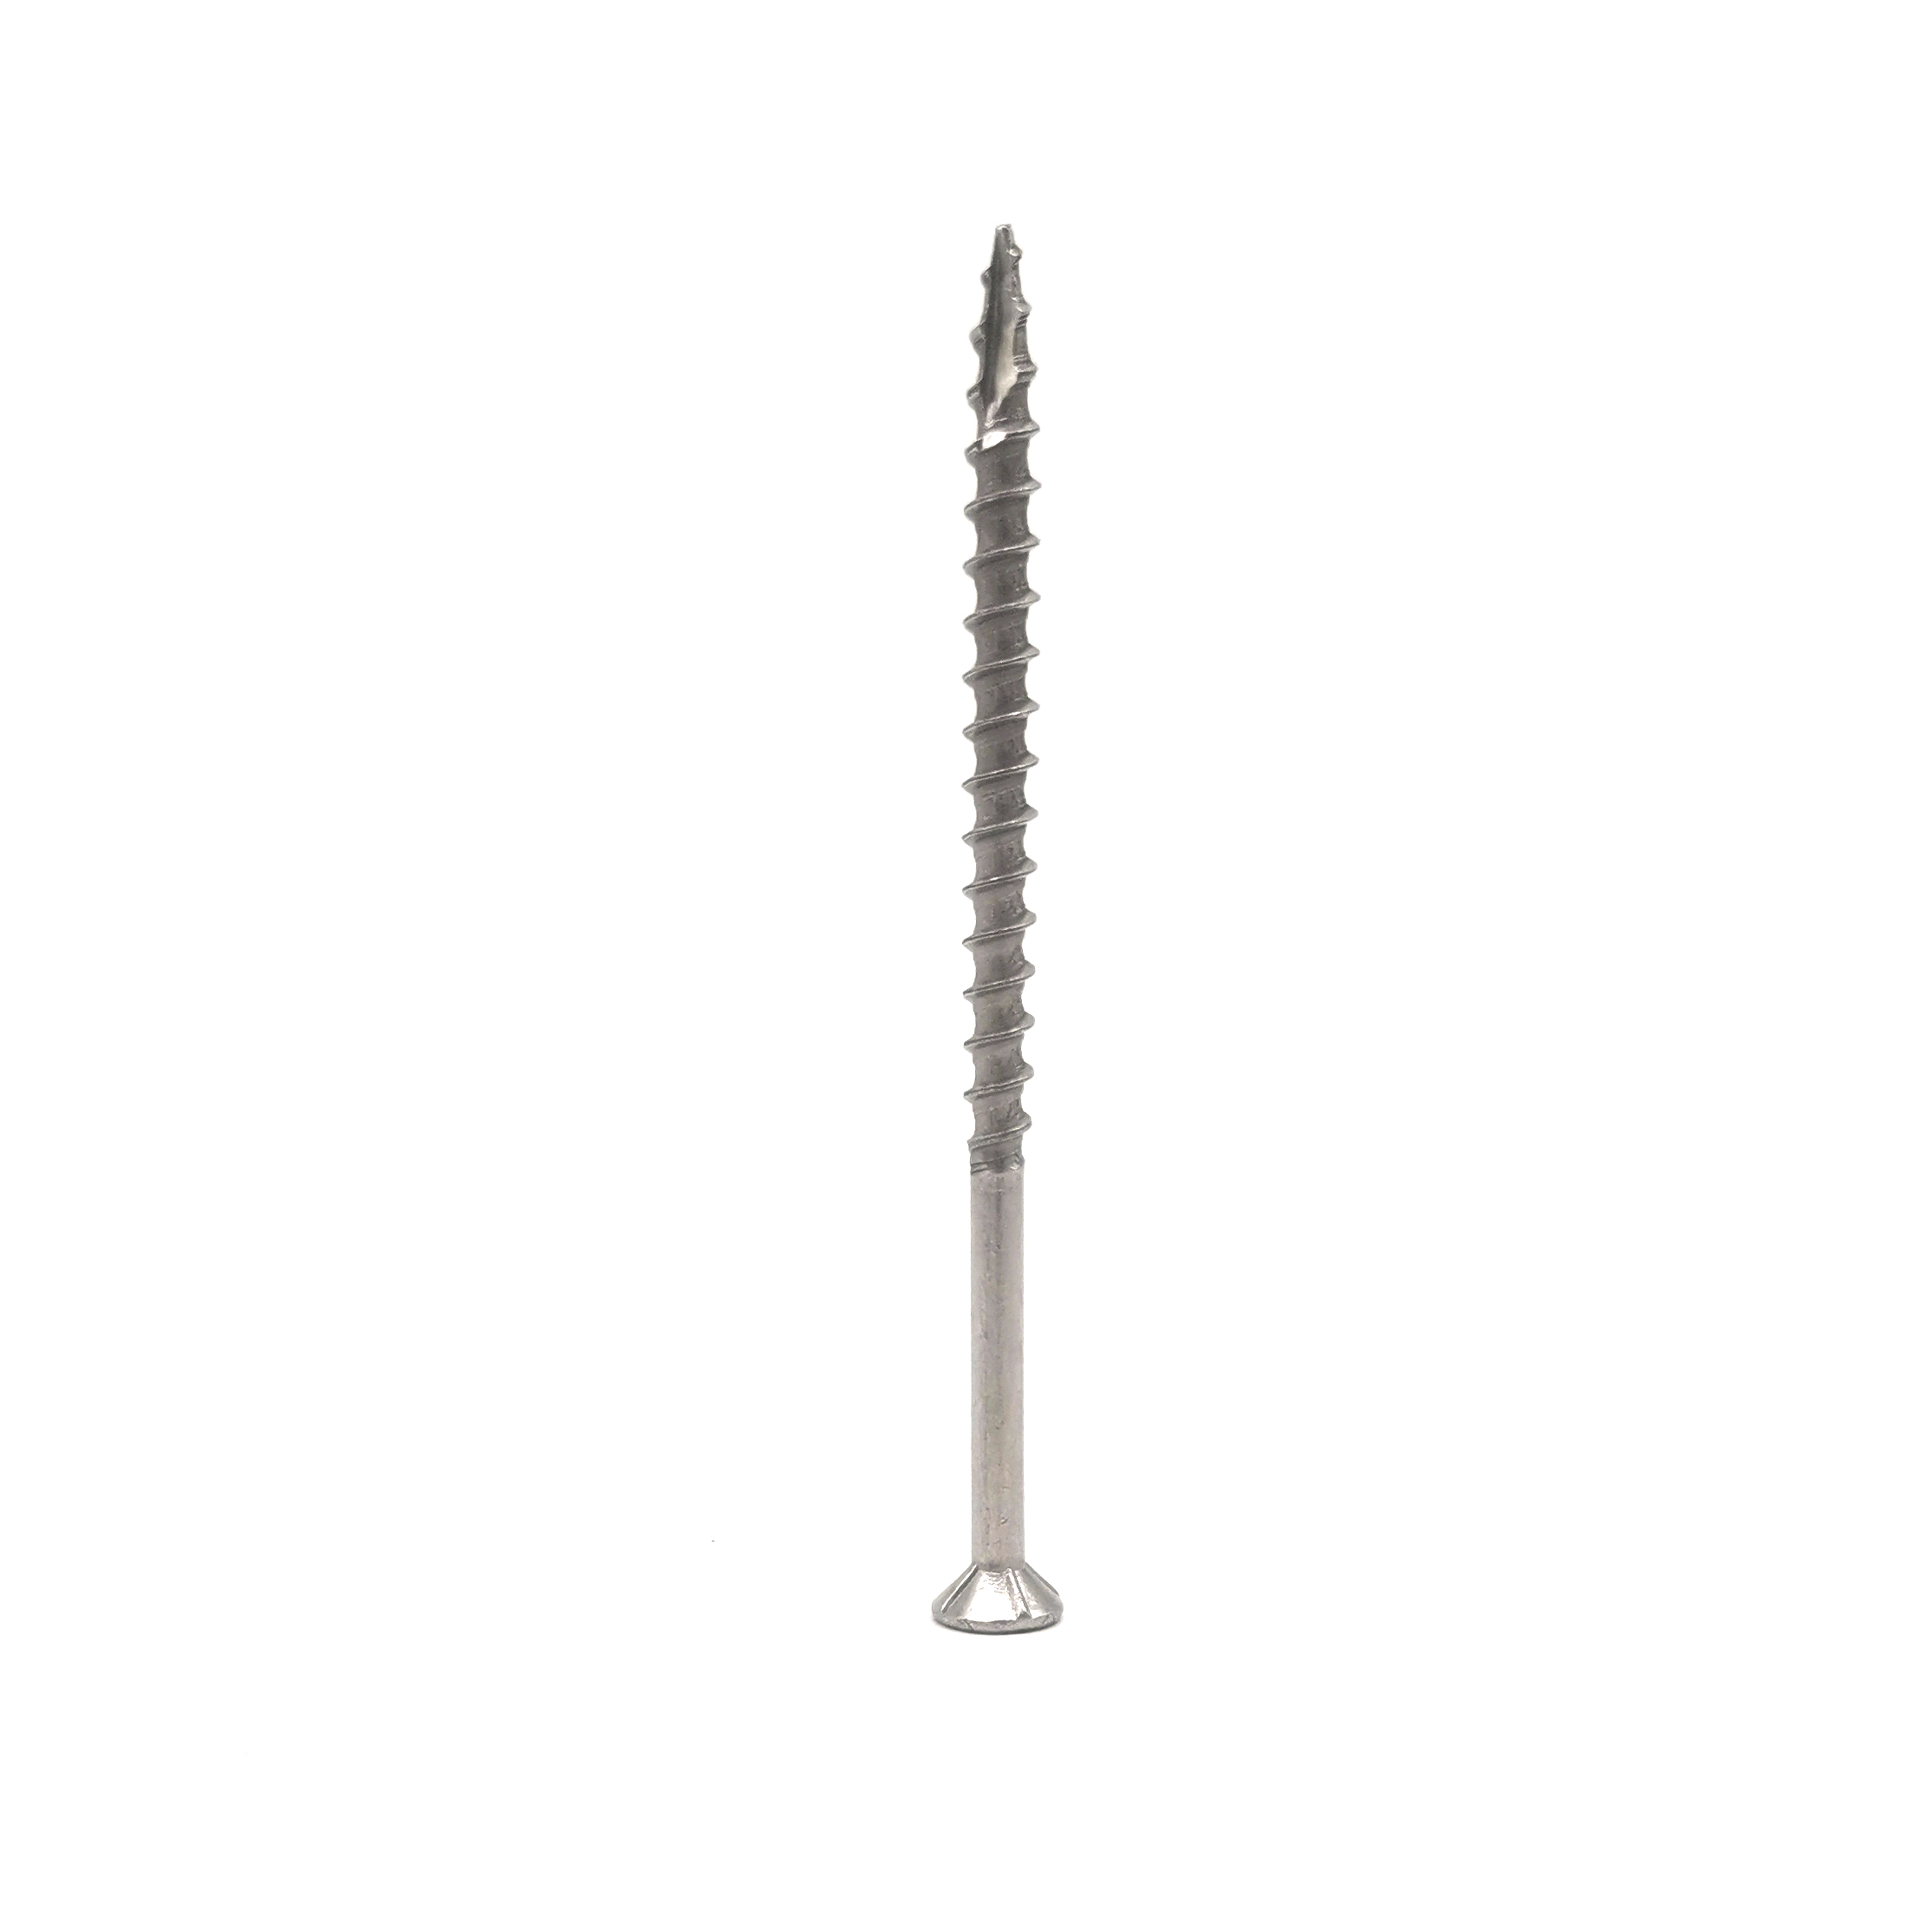 China Factory 410 304 316 Stainless Steel Head Self Tapping Bolt Screw 